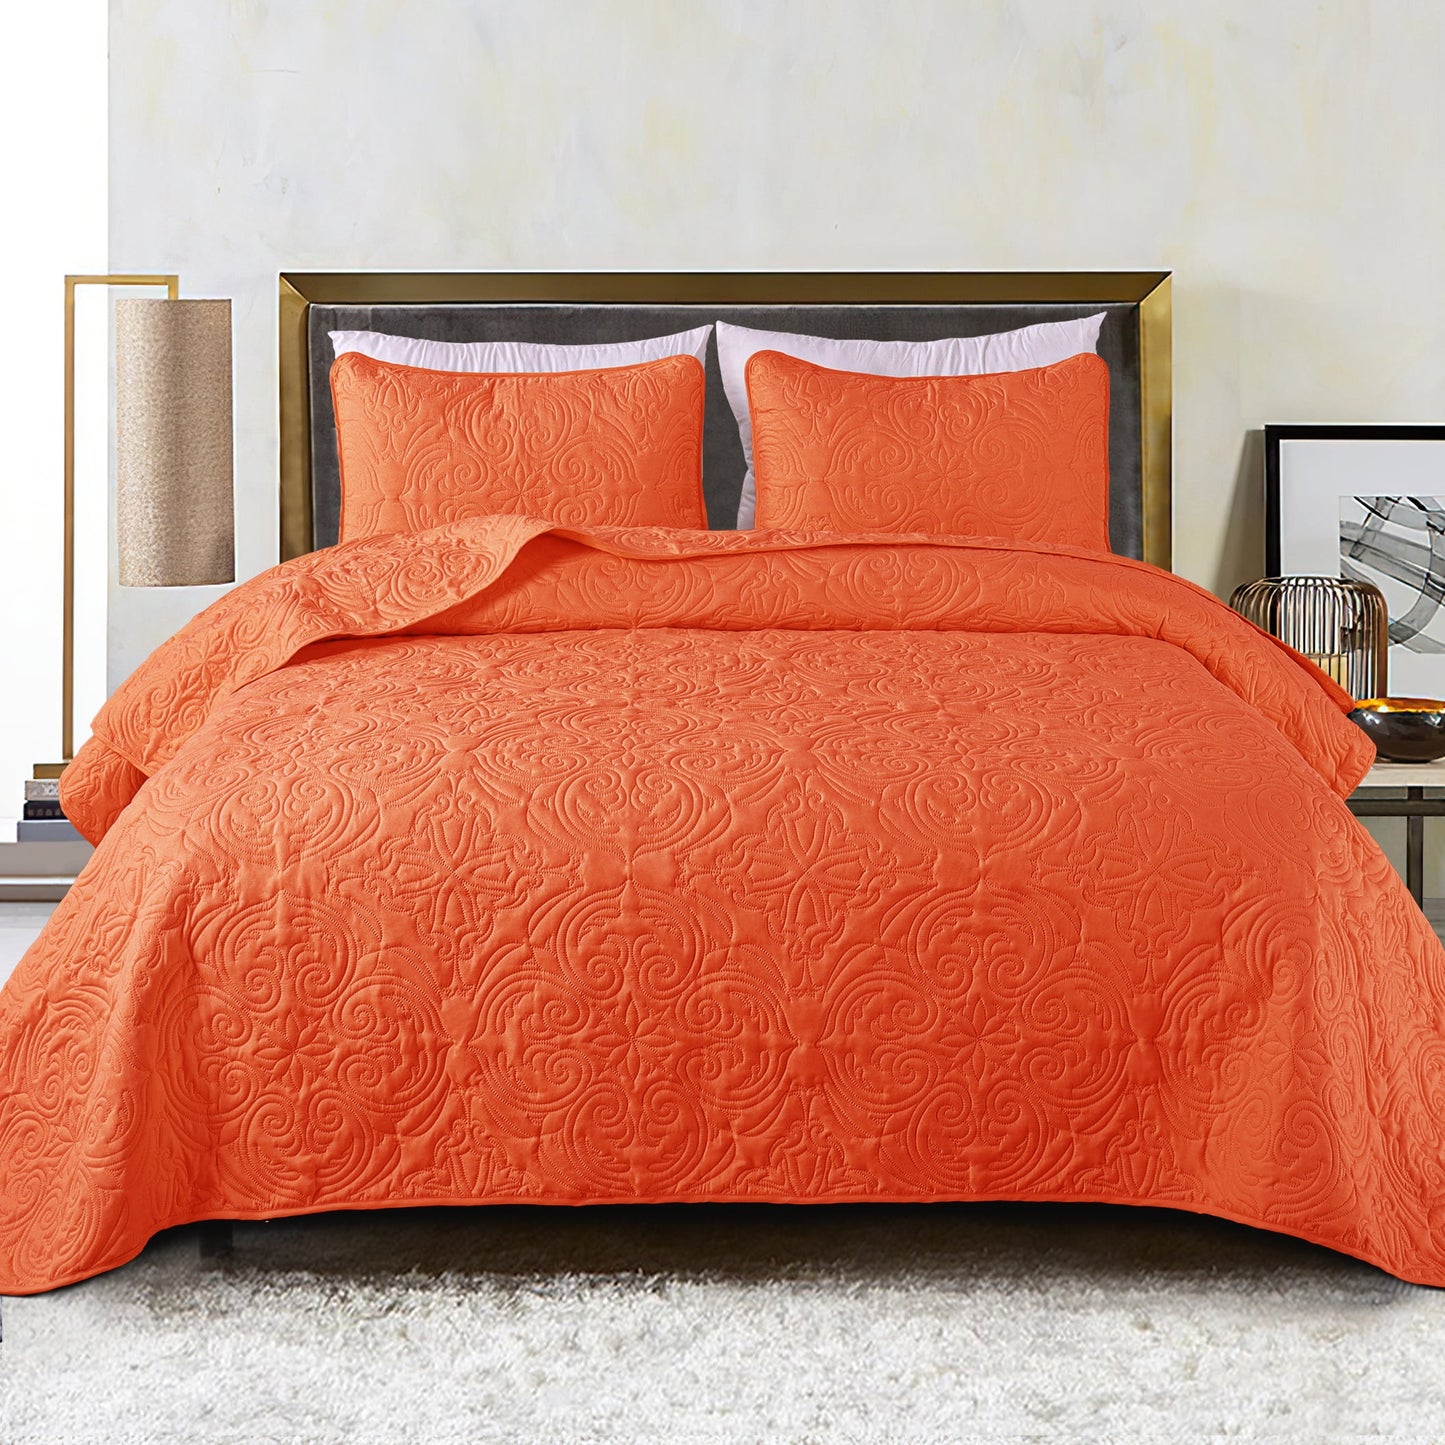 Exclusivo Mezcla King Quilt Bedding Set, Lightweight Vintage King Size Quilts with Pillow Shams, Soft Bedspreads Coverlets for All Seasons, (104"x96", Orange)